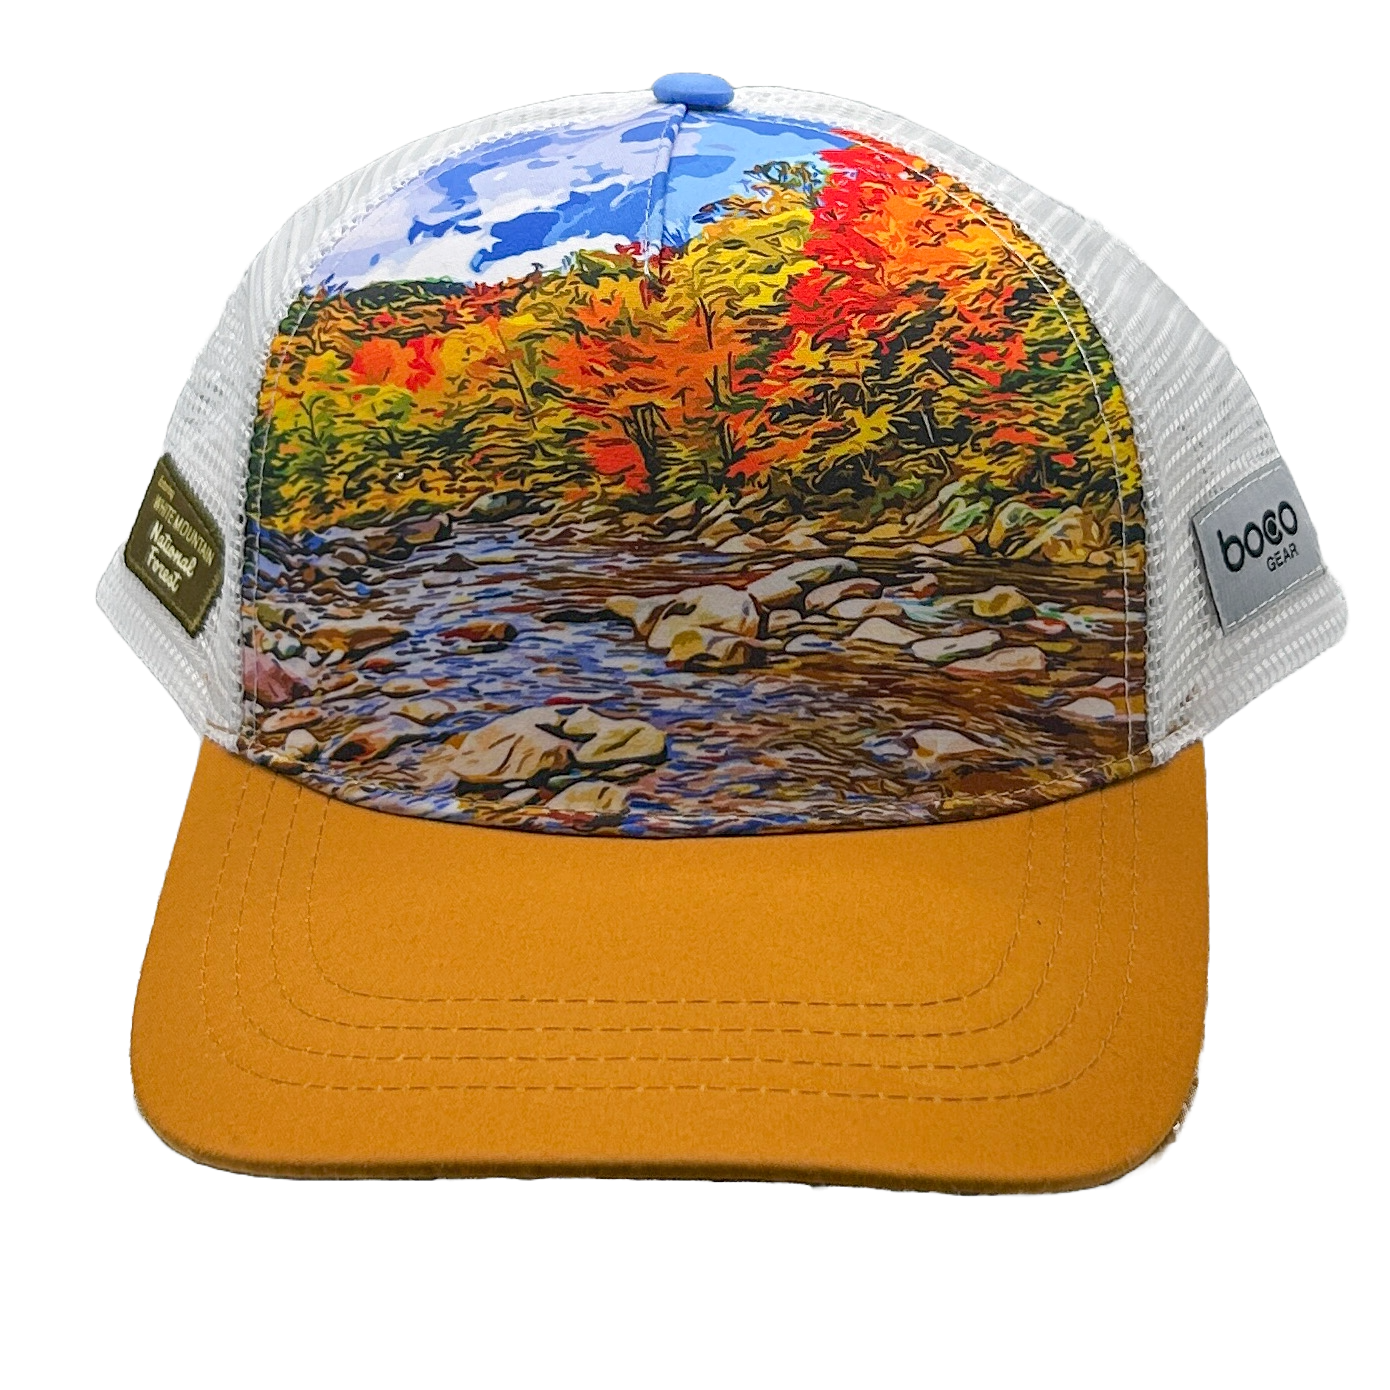 Technical Trucker Boco Hat - White Mountains New Hampshire